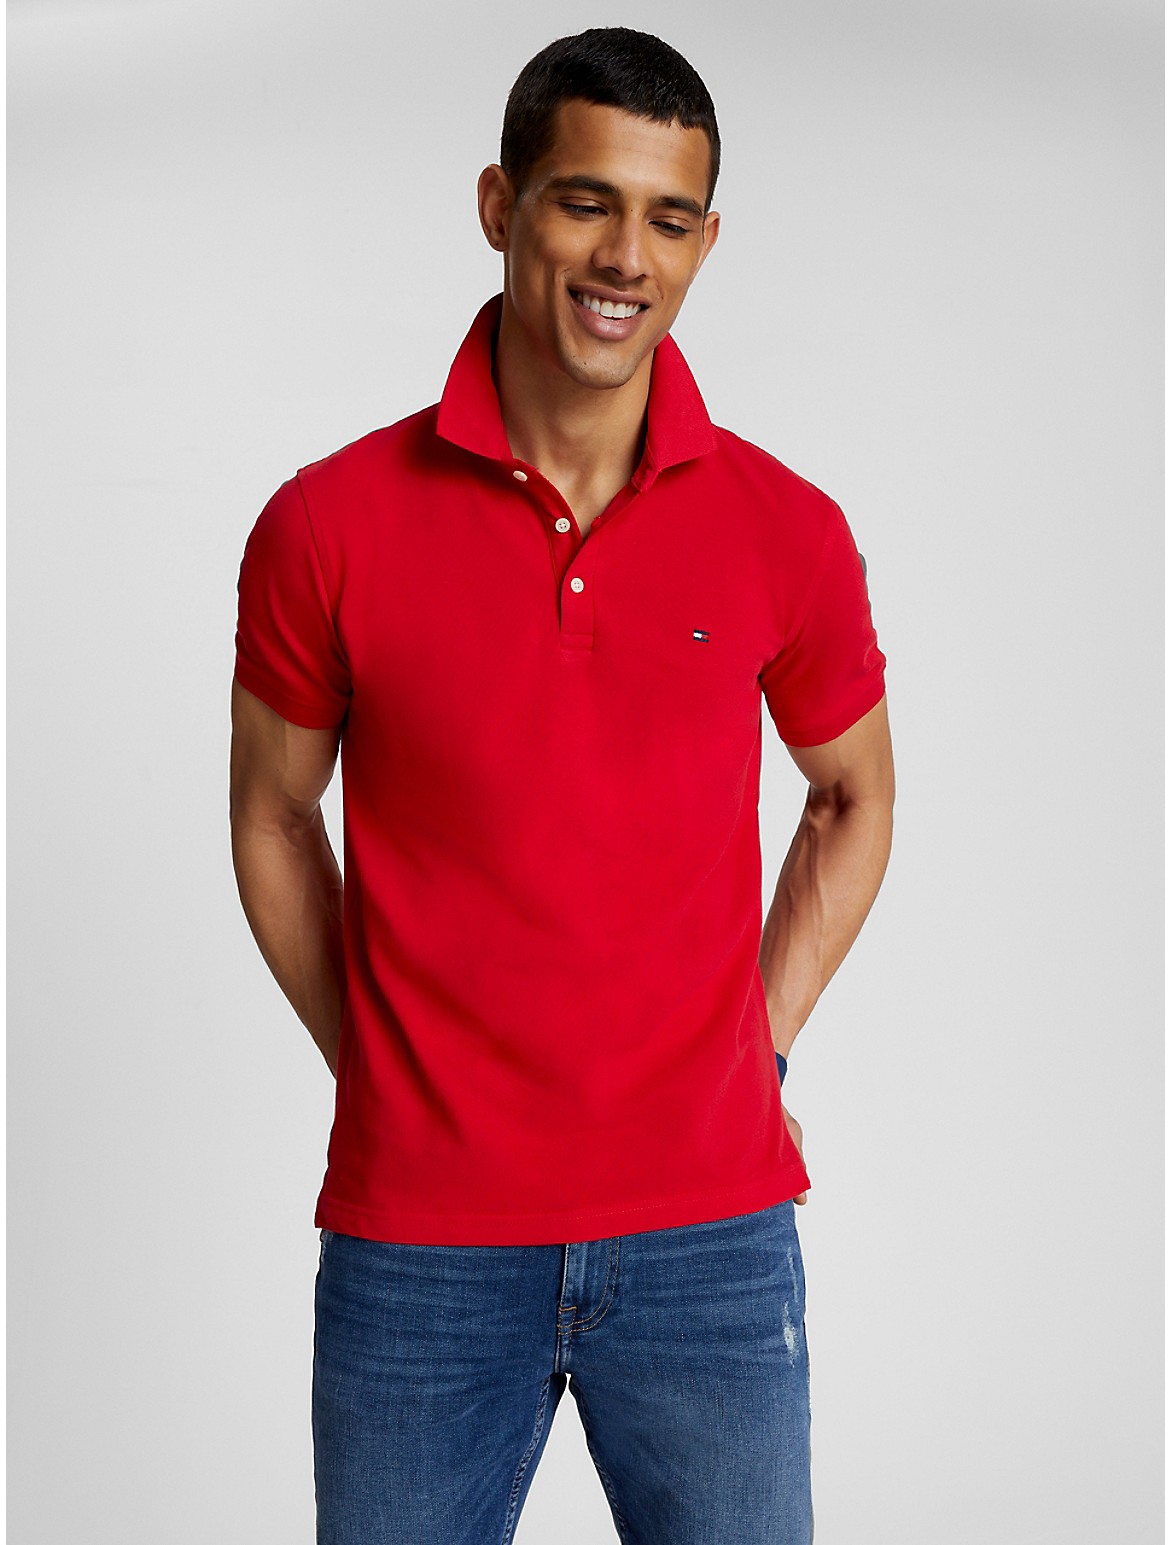 Tommy Hilfiger Men's Slim Fit Tommy Polo - Red - XXXL